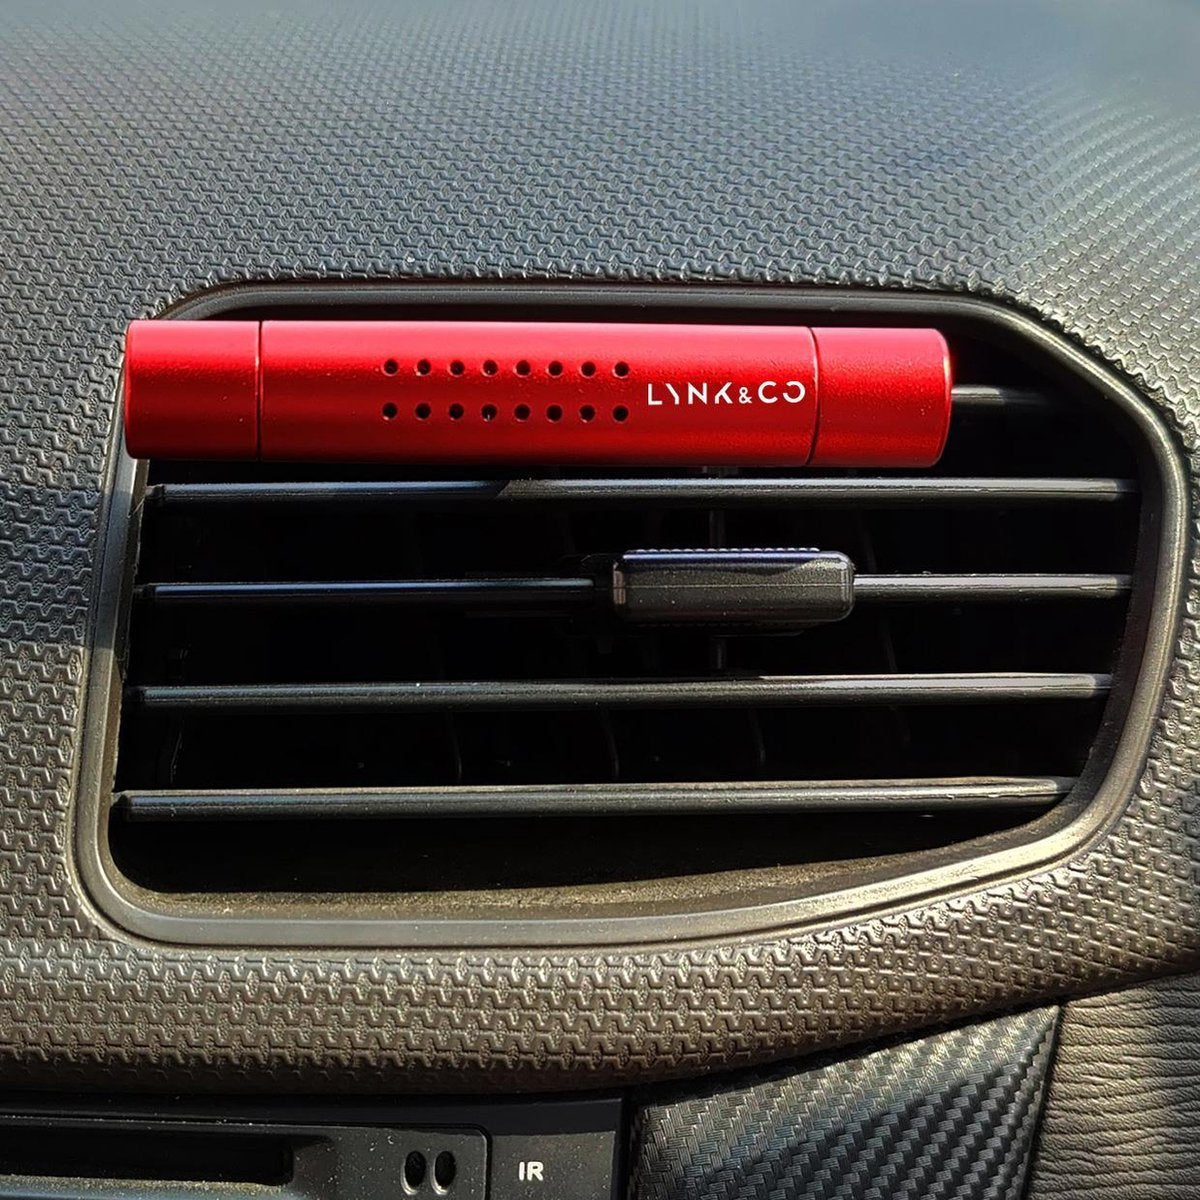 <tc>Ariko</tc> Car air freshener Red | Provides a fresh scent to your Lynk & Co | Car Freshener | Trendy design | Ventilation grille mountable | Refillable | Car Fishy | Fragrance freshener | With refill